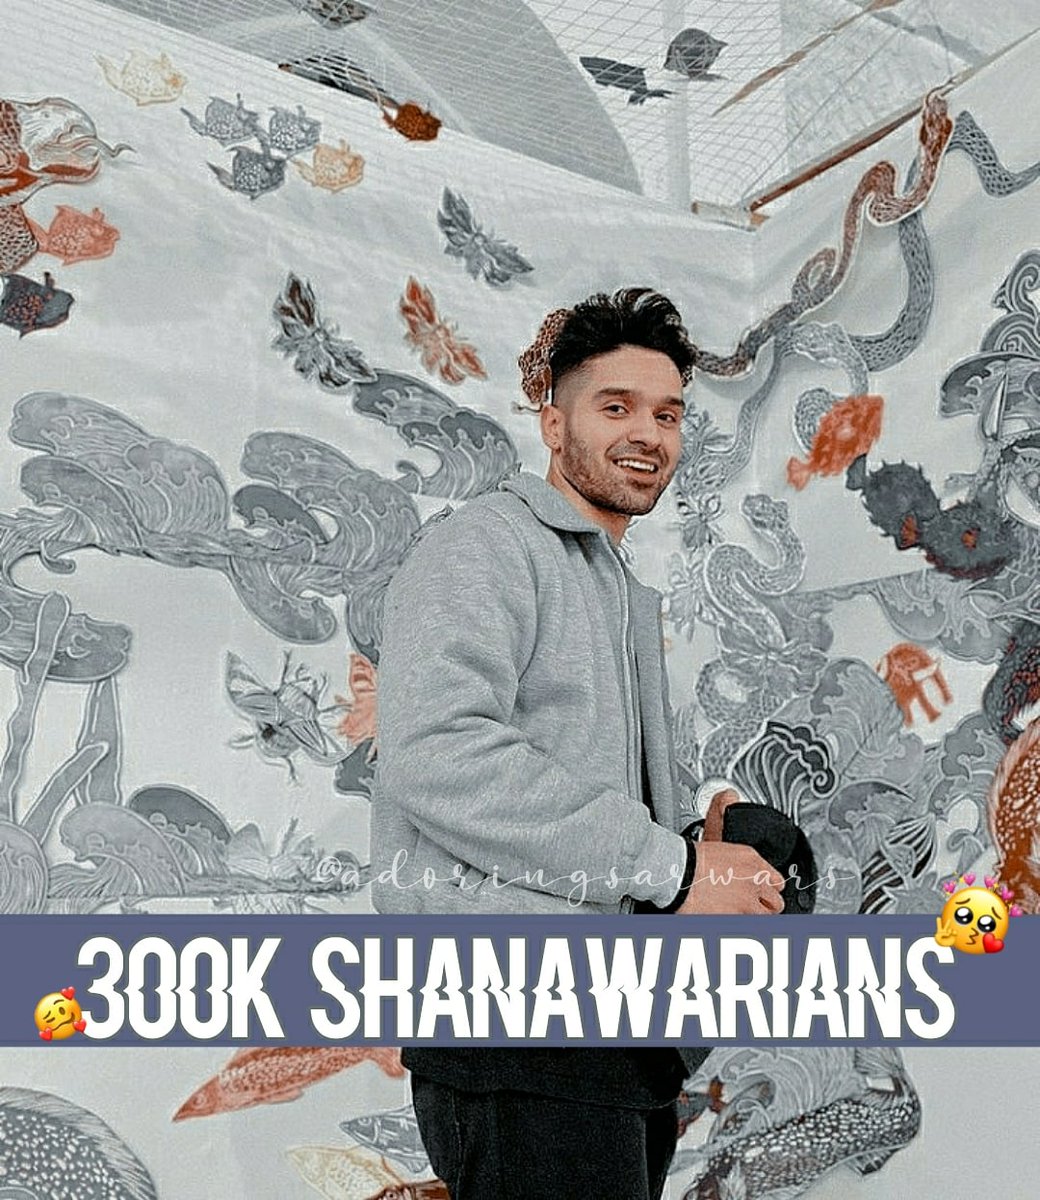 300K FAMILYFANS!!! WORDS FAIL TO DESCRIBE HOW MUCH I LOVEEE THIS HUMAN AND THE INFLUENCE HE HAS❤HES BEEN THE BEST IDOL AND PERFECTLY PERFECT HUMAN,HIS SMILE HIS VOICE,AND HIM🤍 @AliShanawar1
#300Kshanawarians